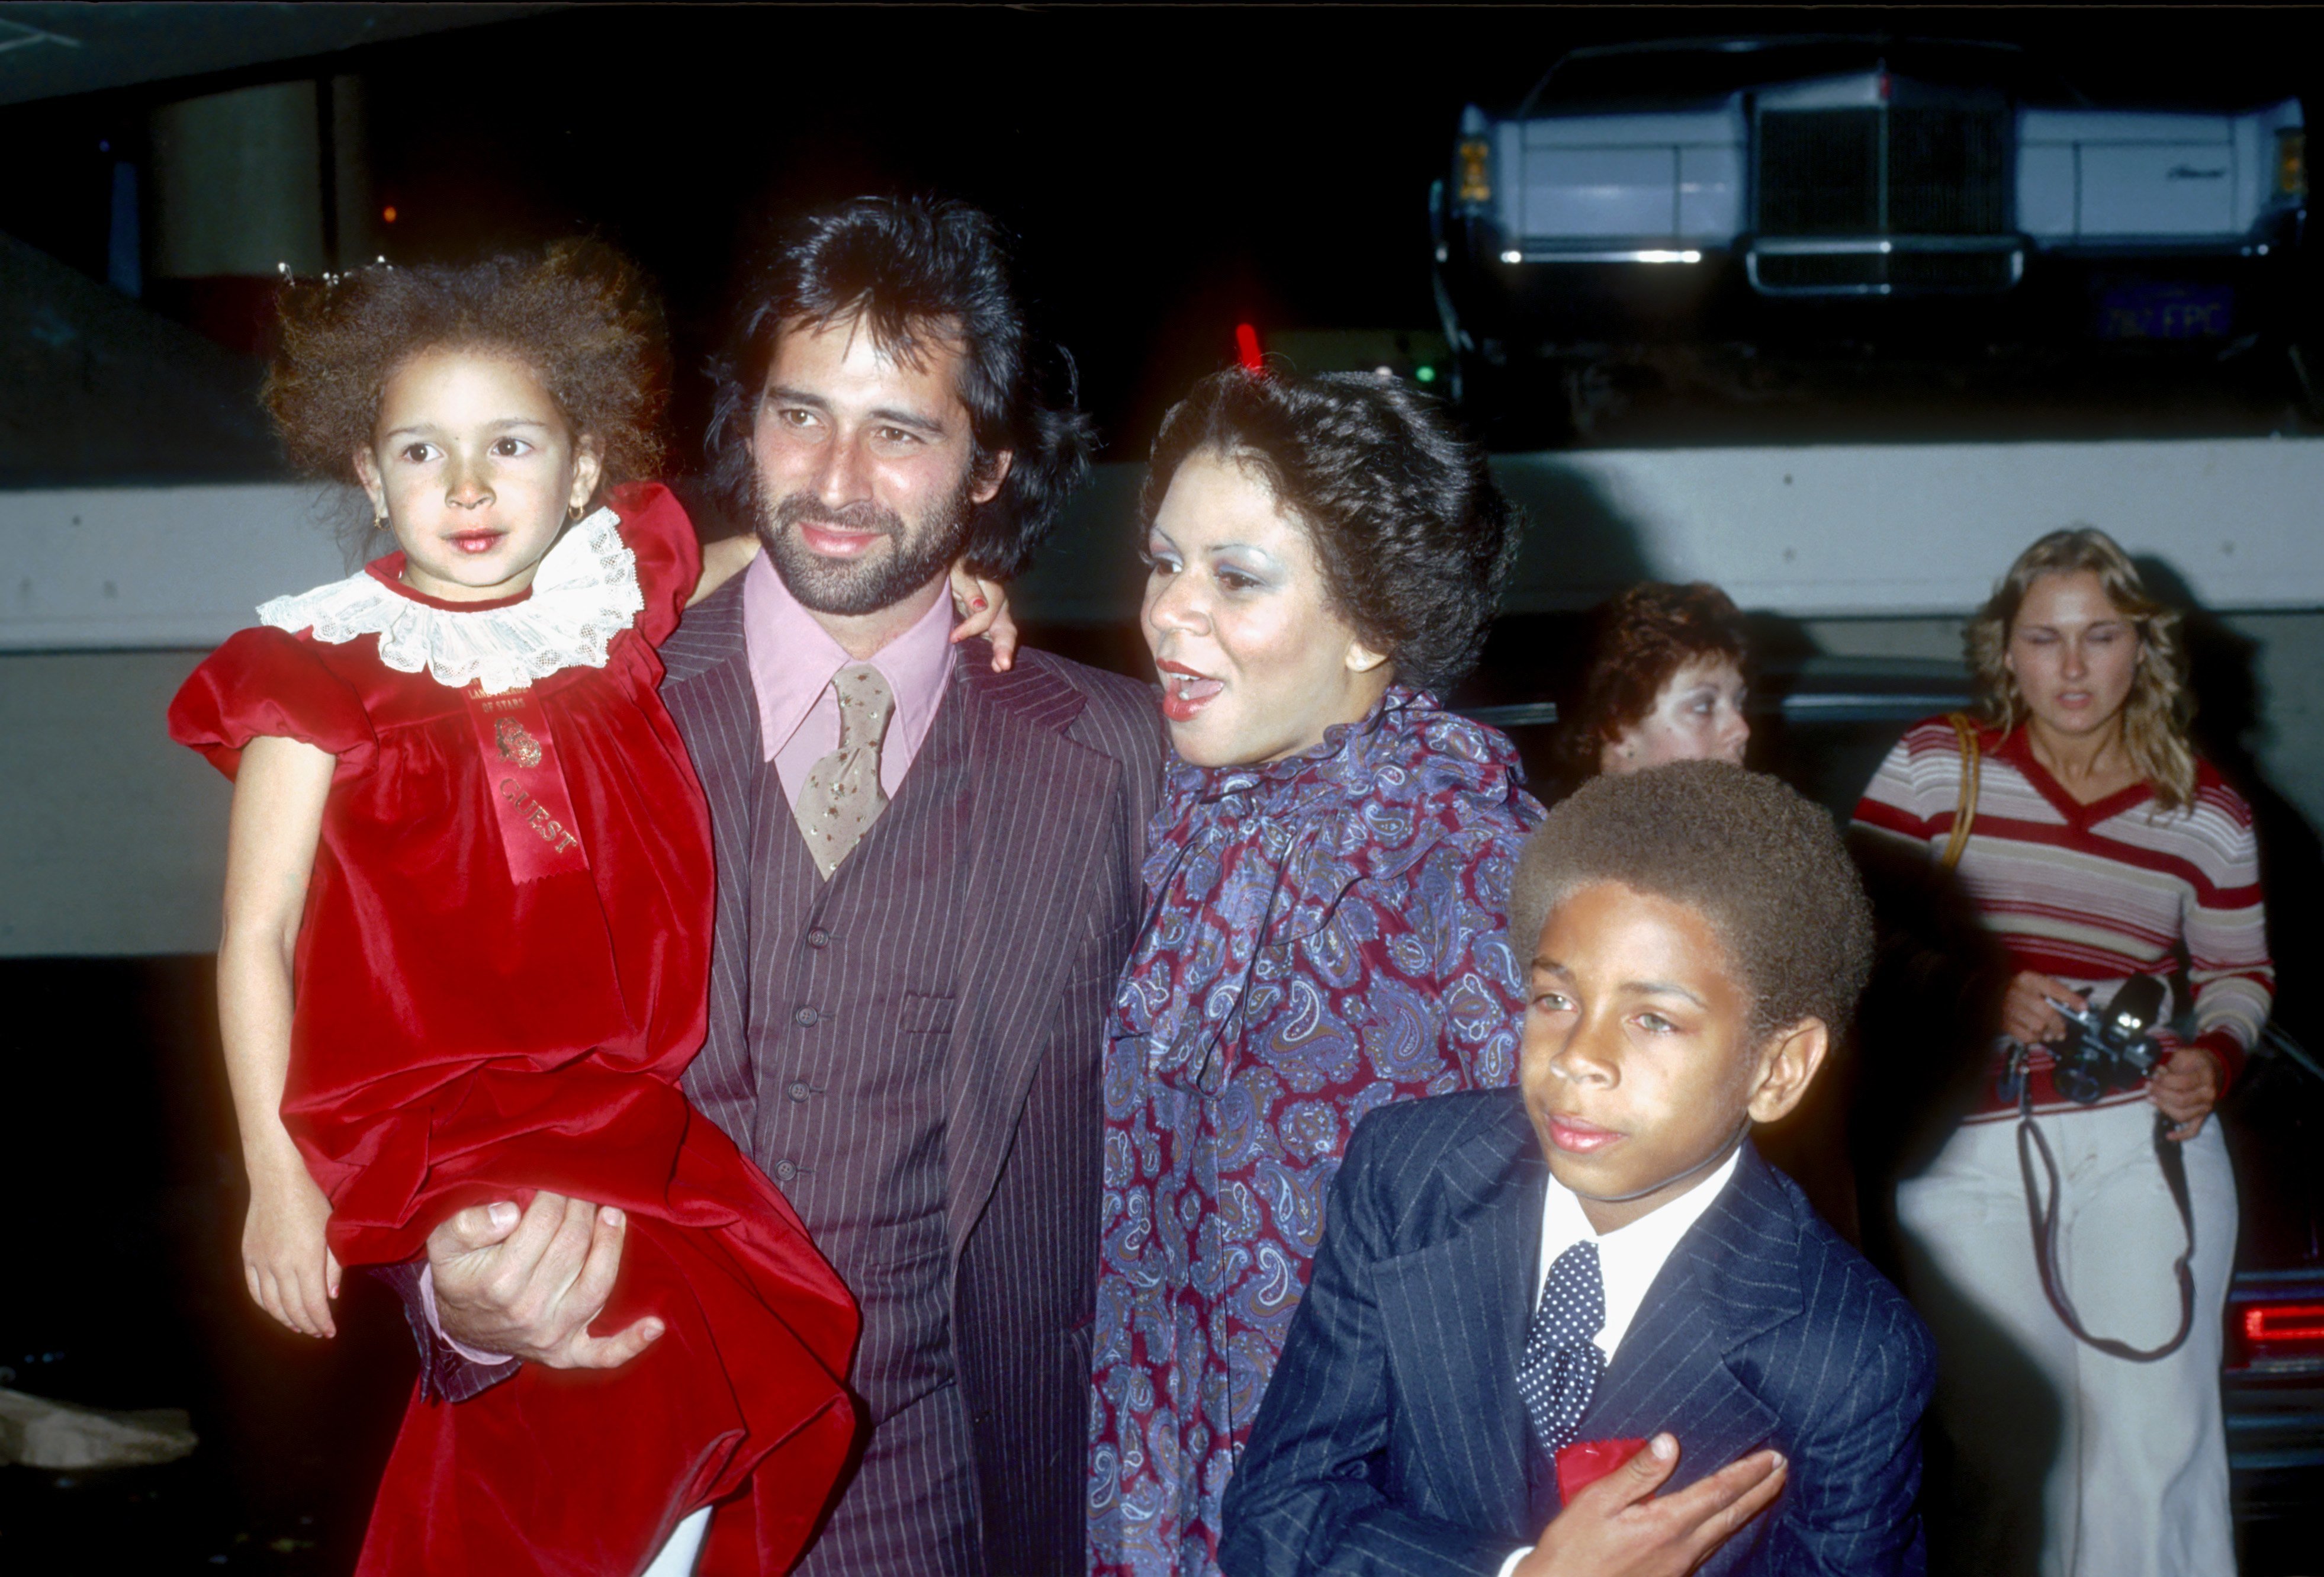 Minnie Riperton, Richard Rudolph and their children Maya and Marc Rudolph at the Hollywood Christmas Parade in December 1978 in Los Angeles, California. | Photo: Getty Images